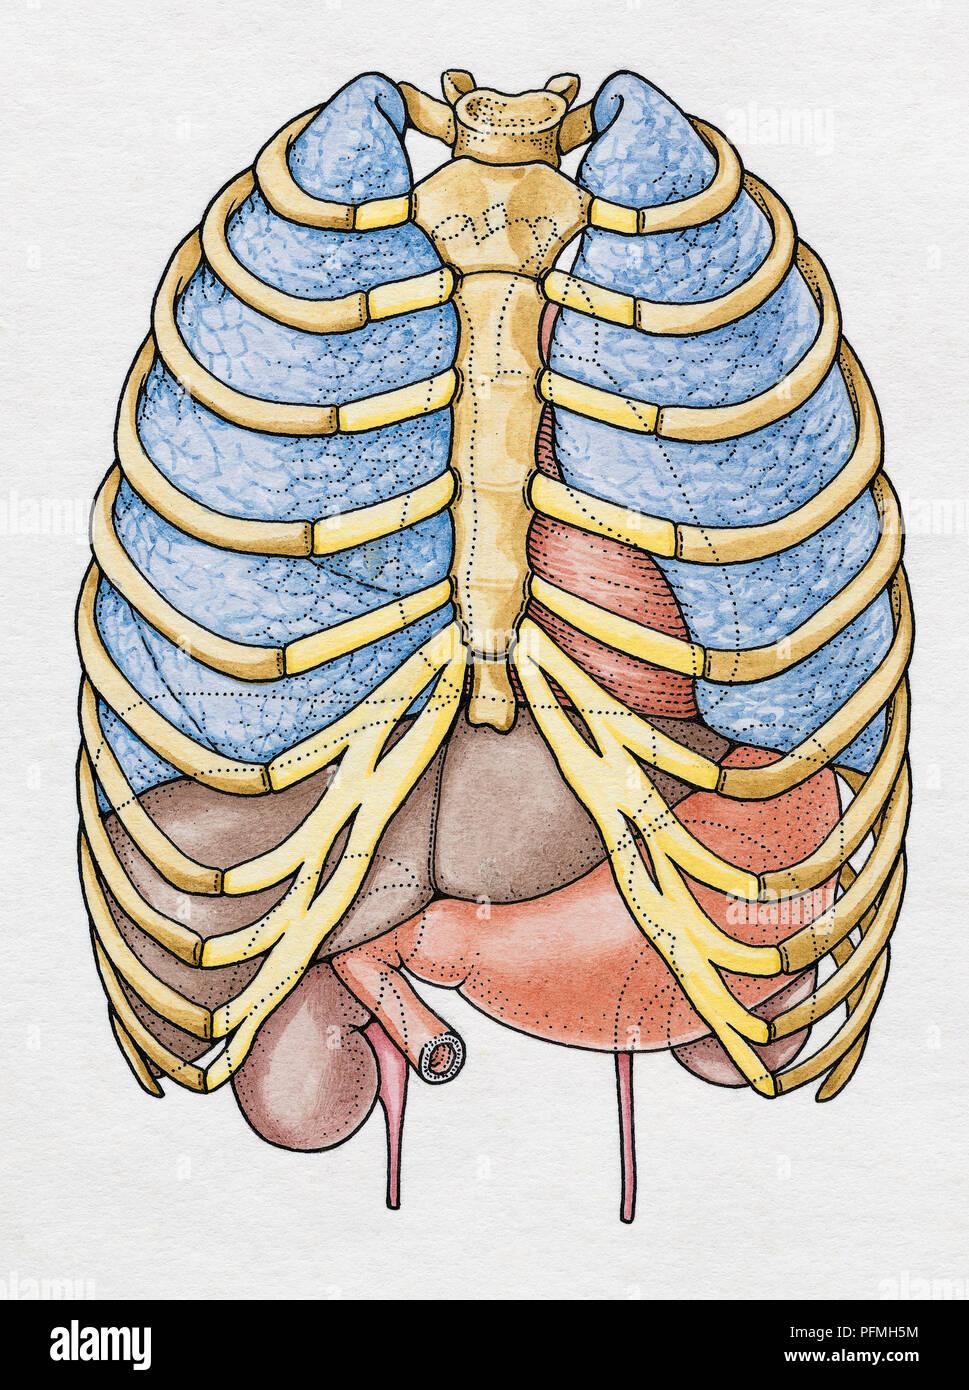 Internal Anatomy of Human Ribcage showing Lungs, Liver ...